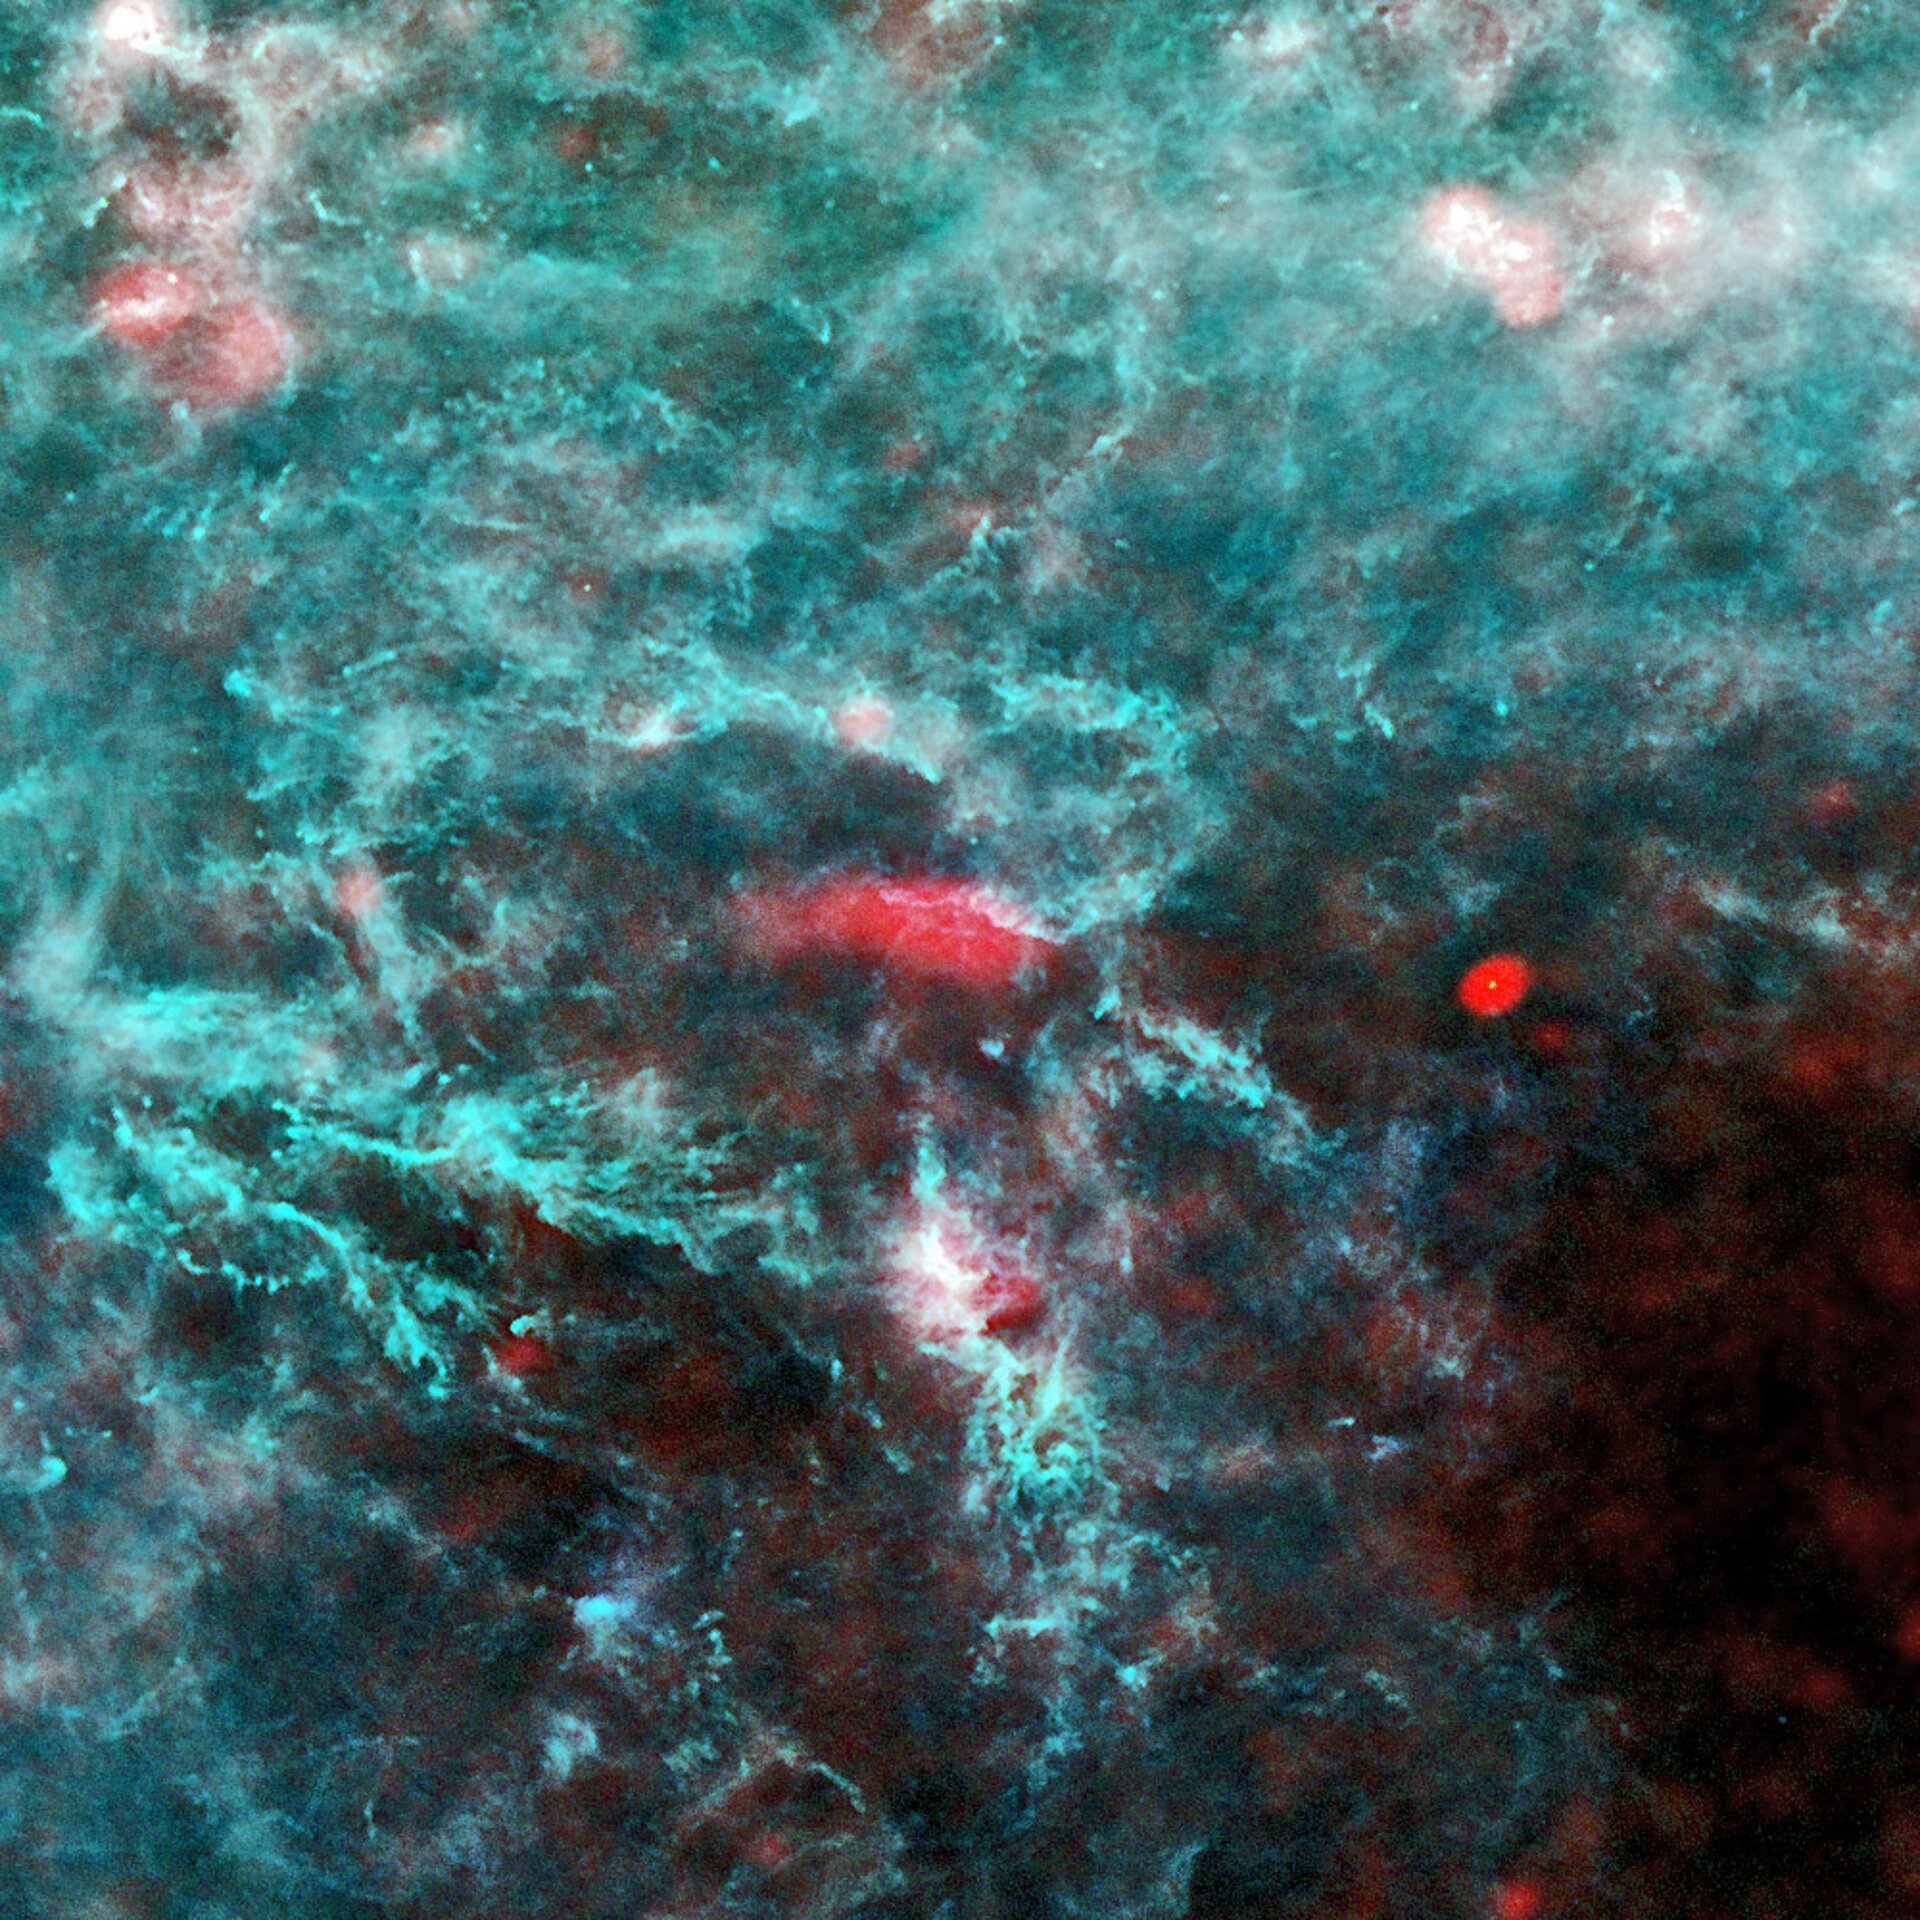 Planck image of a region in the constellation Perseus